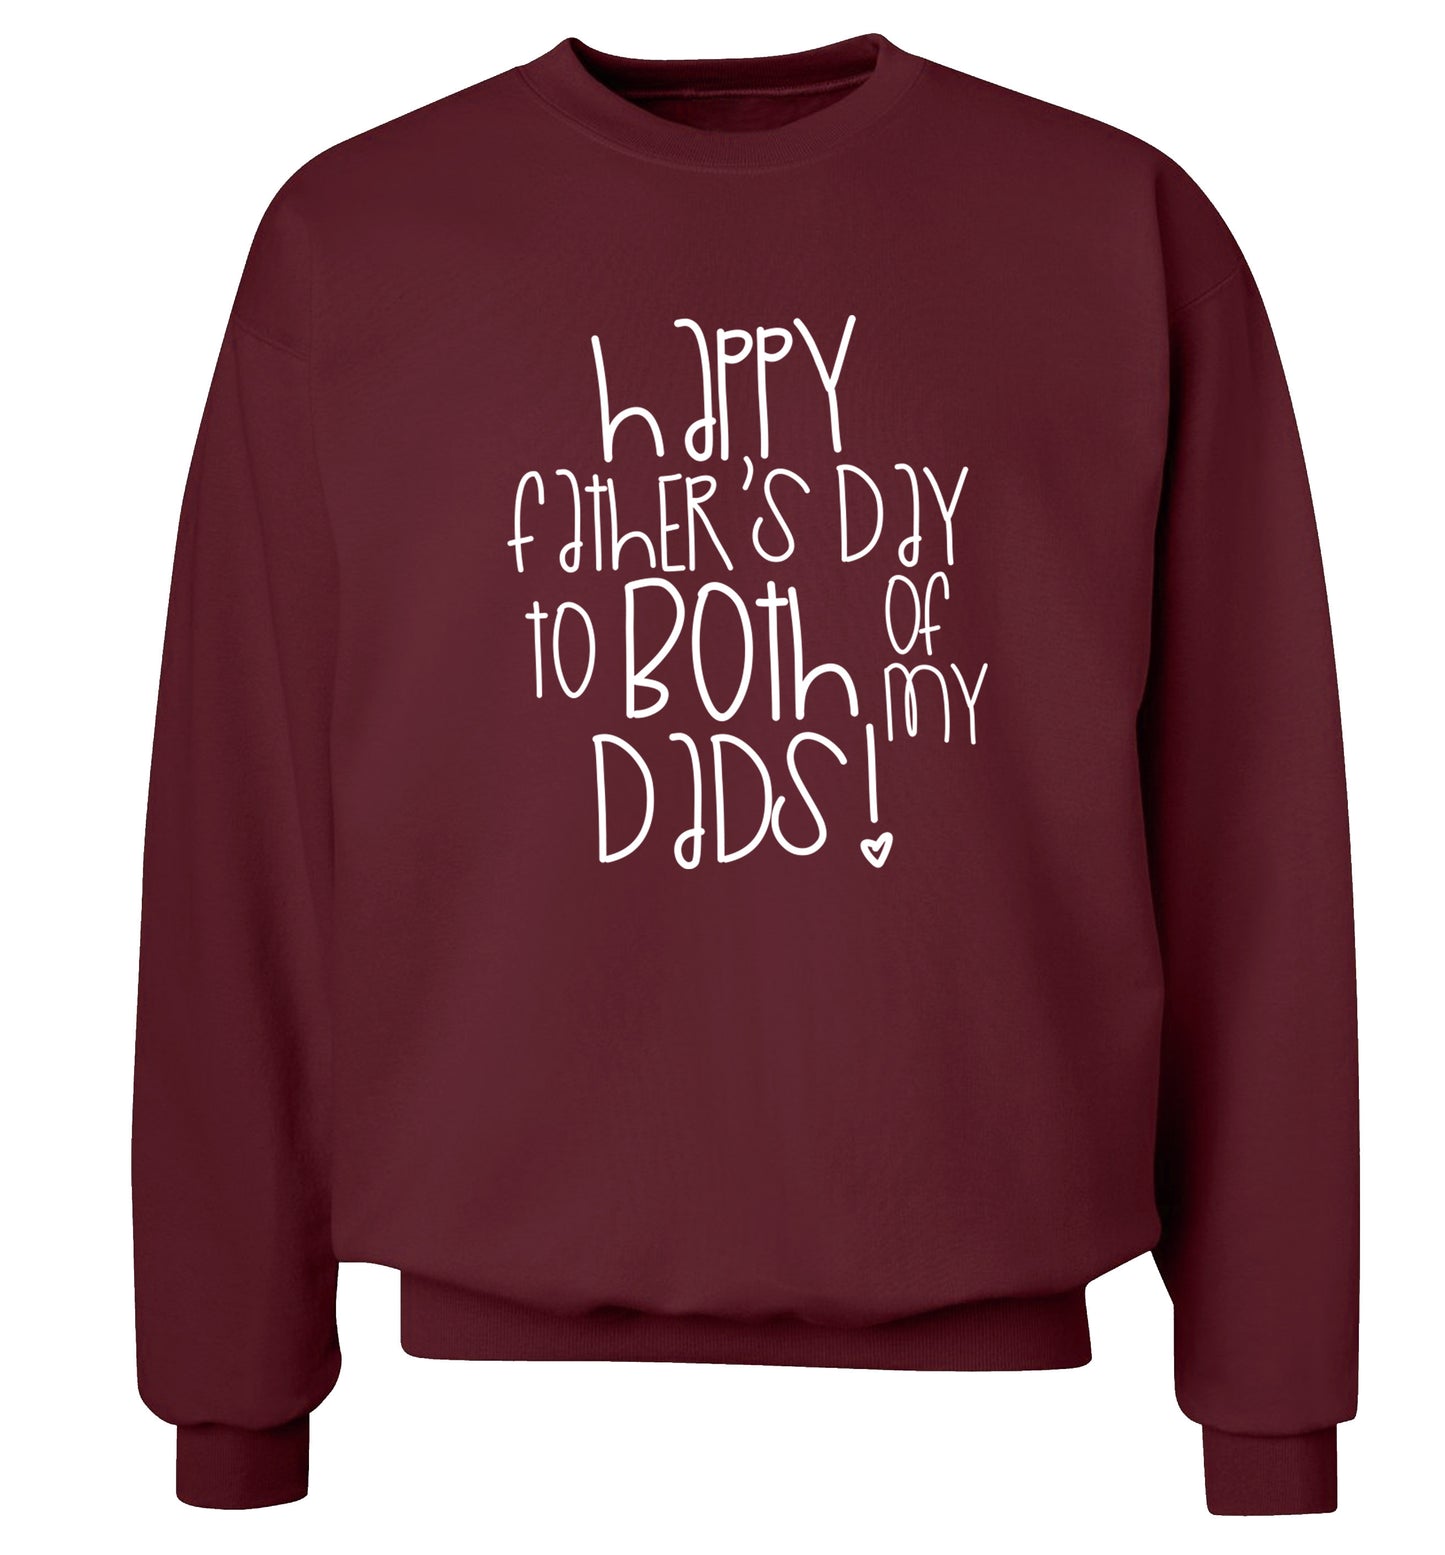 Happy father's day to both of my dads Adult's unisex maroon Sweater 2XL